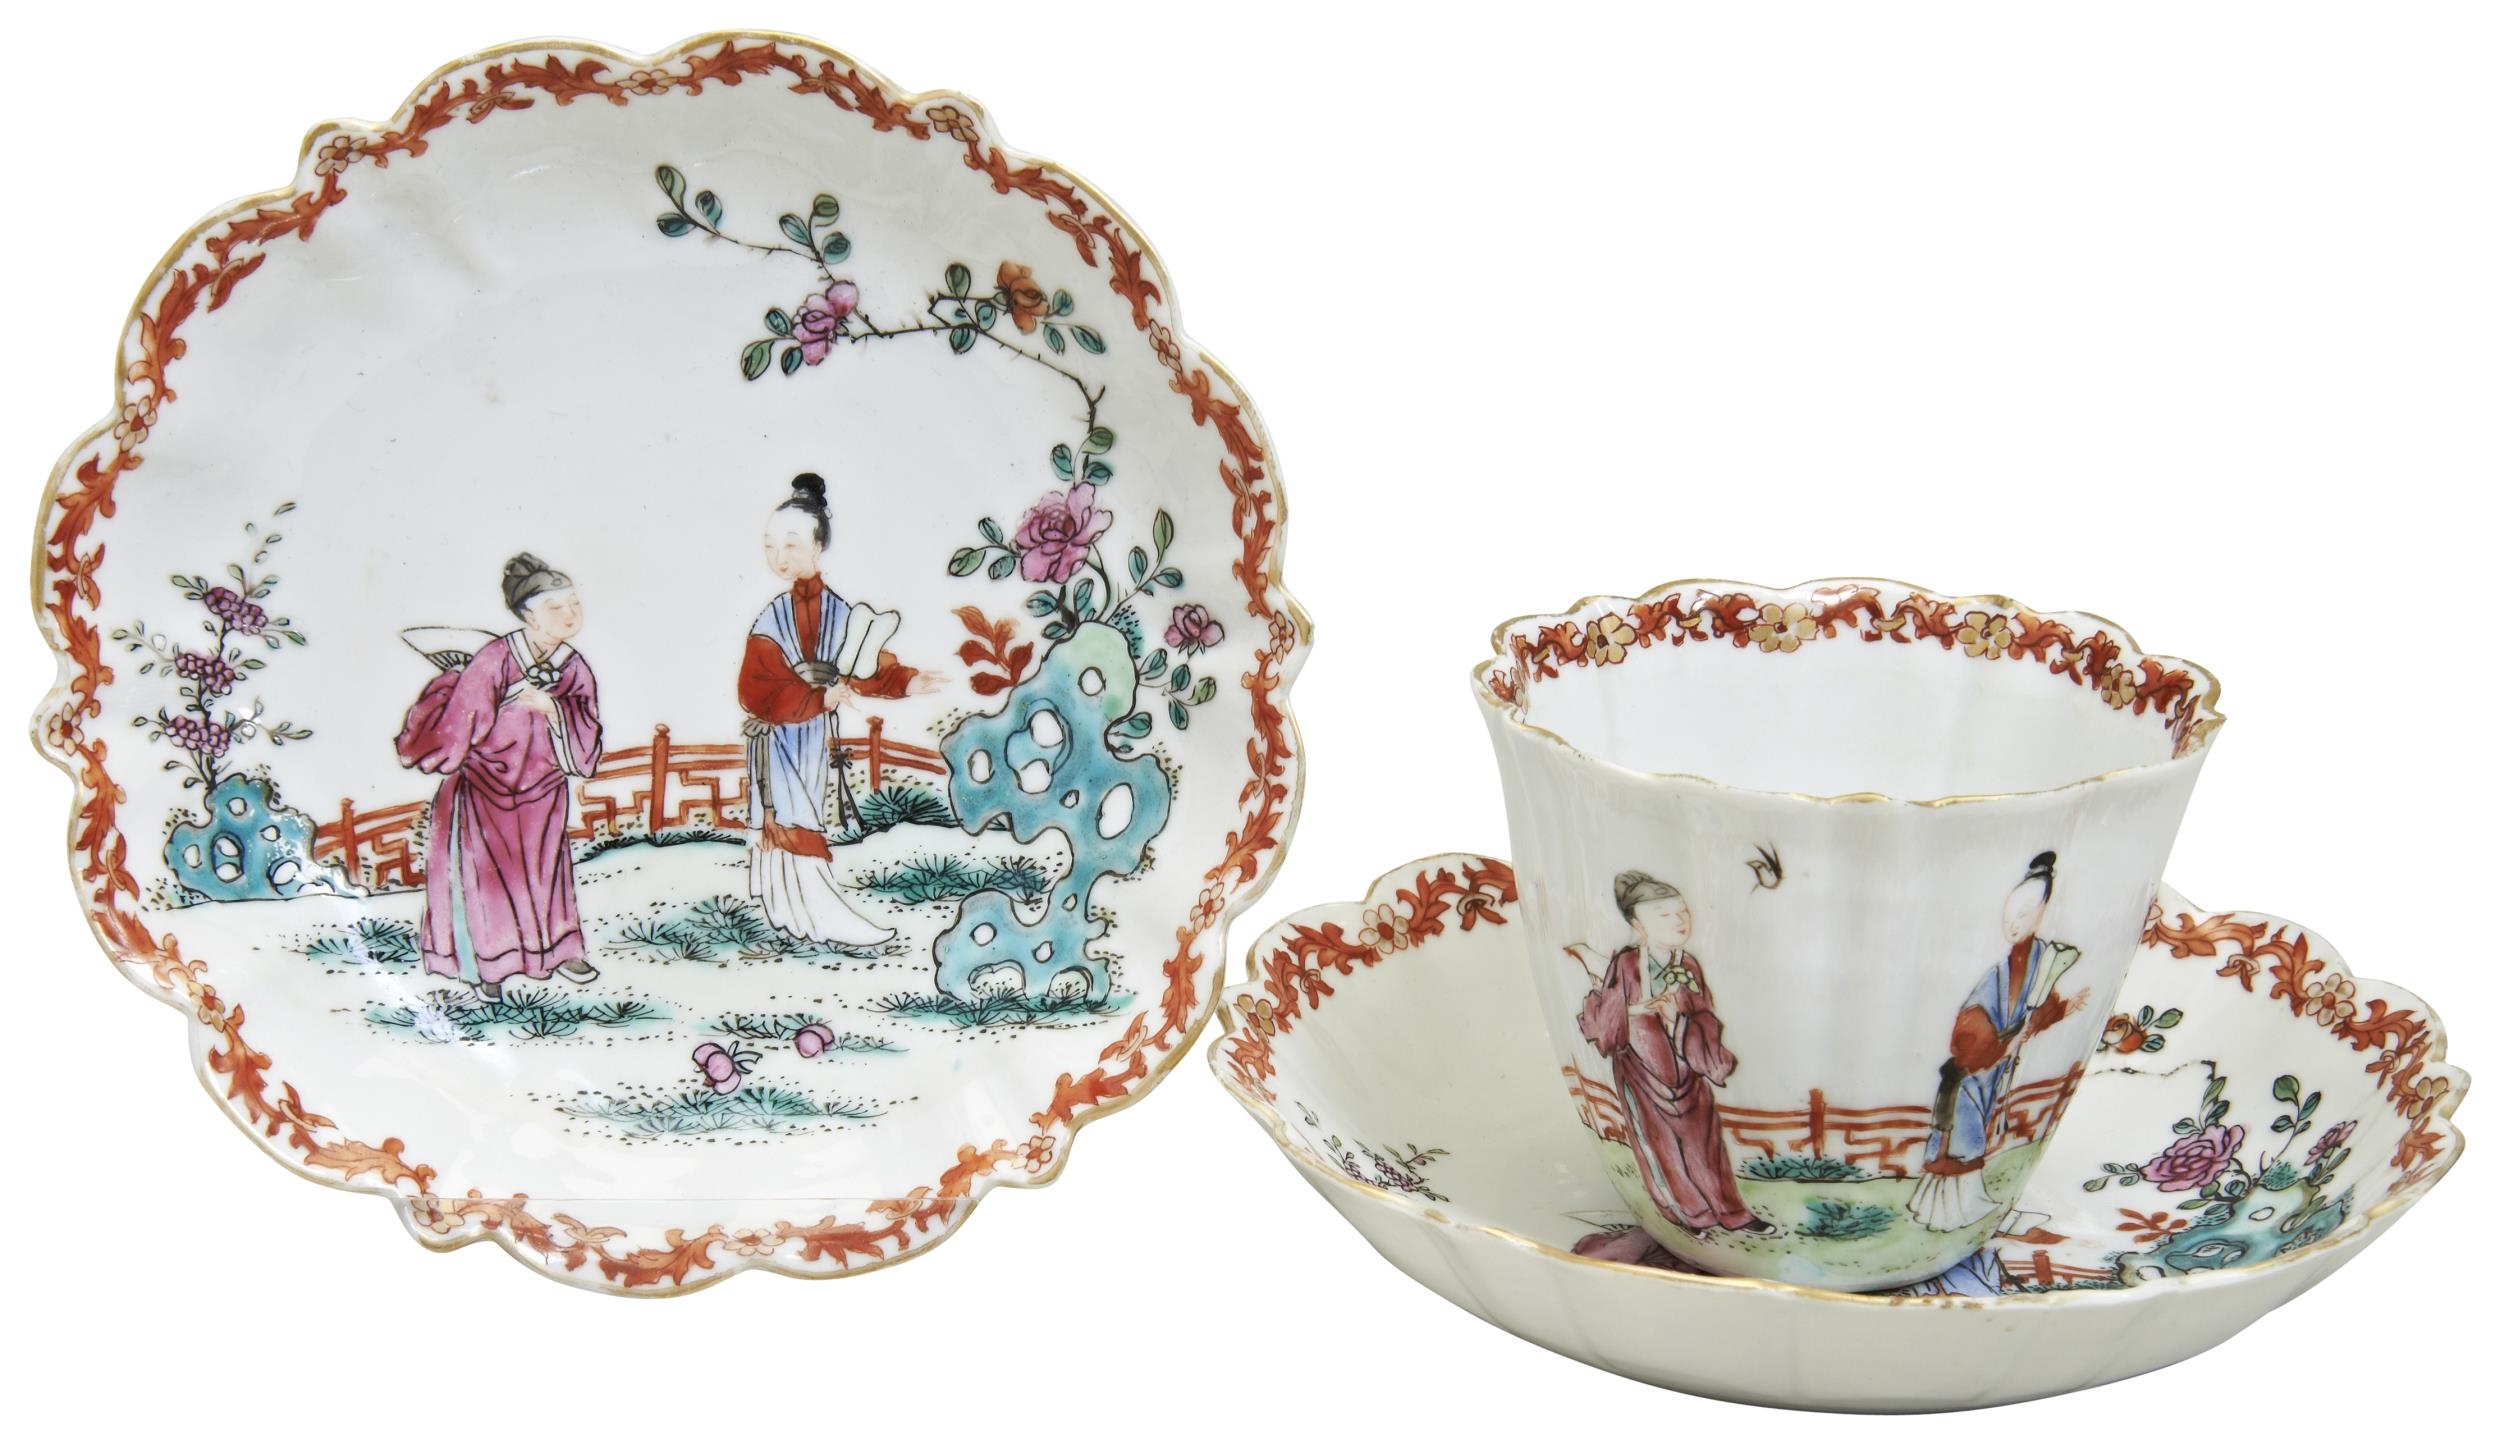 A FAMILLE ROSE CUP AND TWO SAUCERS QING DYNASTY, 18TH CENTURY  Depicting figures in a garden